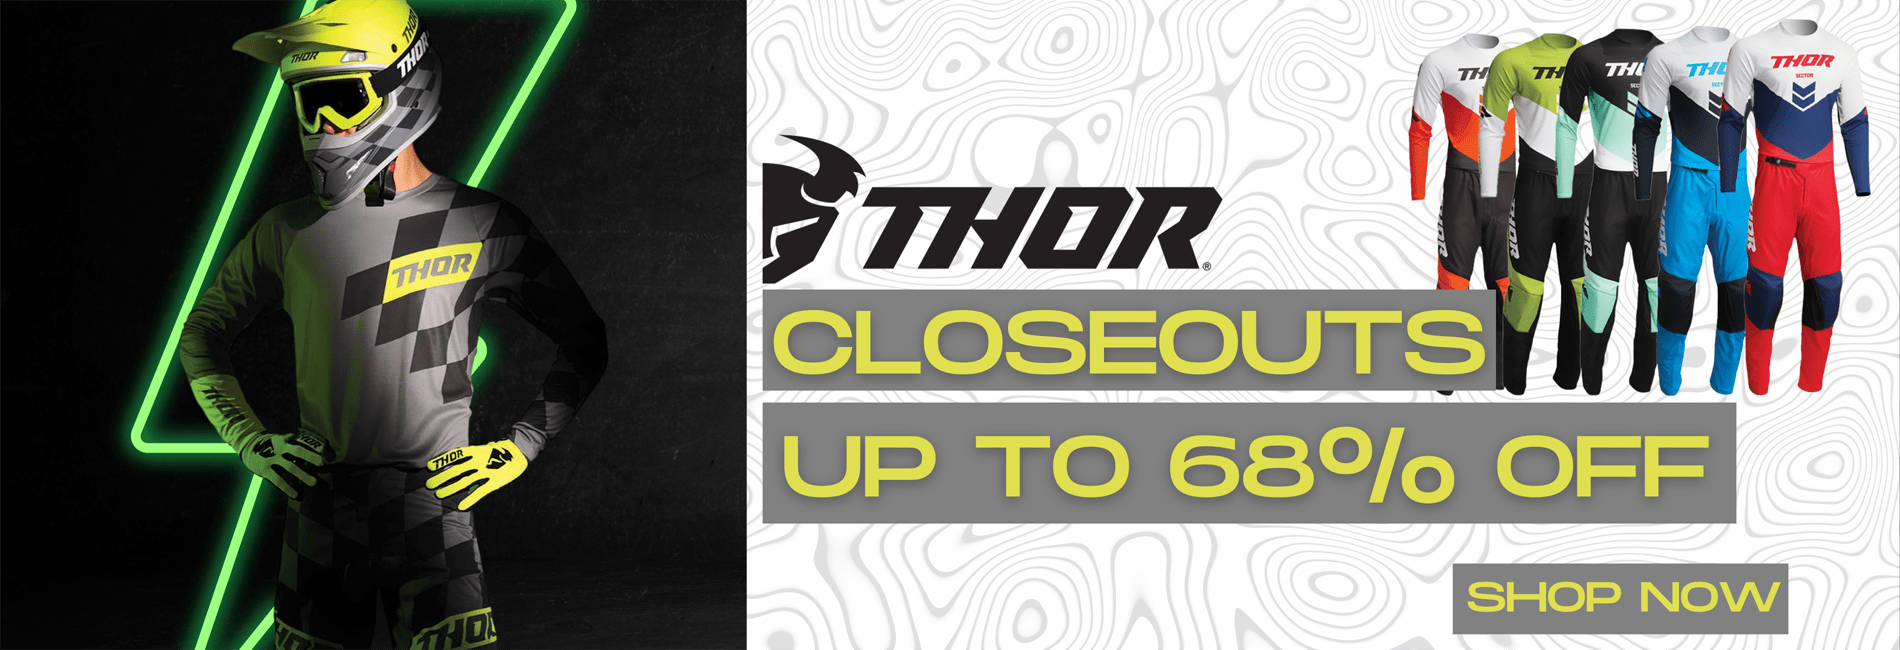 Thor MX Closeouts up to 68 percent off